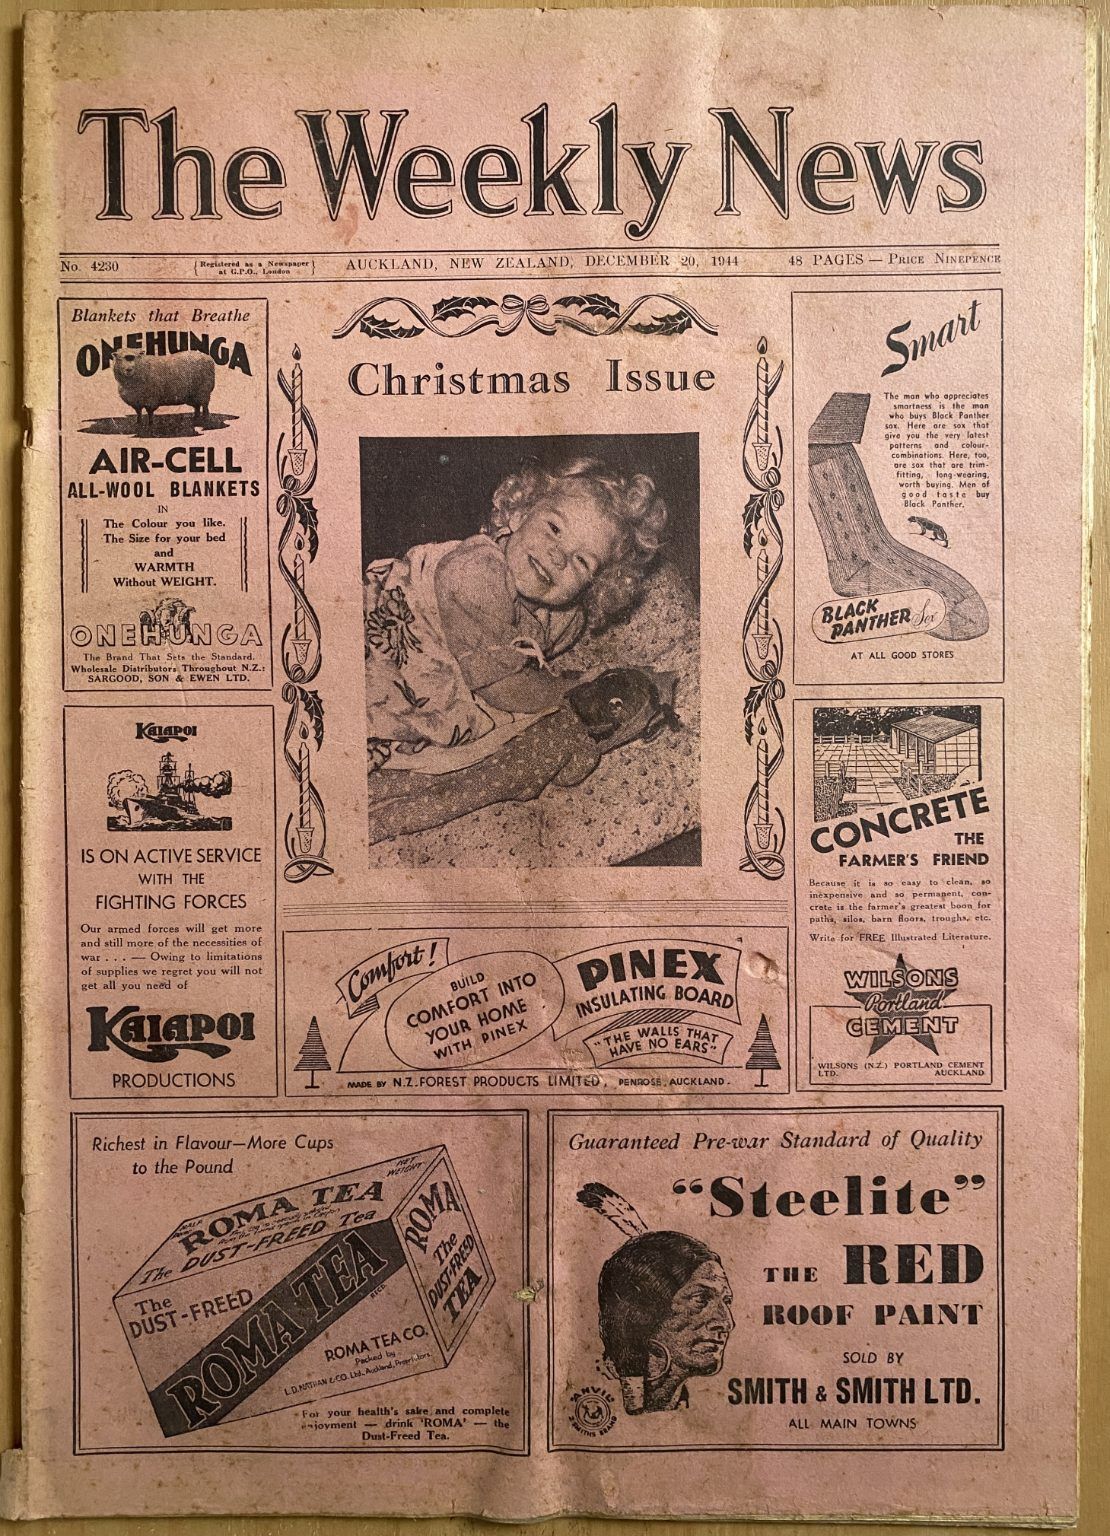 OLD NEWSPAPER: The Weekly News - No. 4230, 20 December 1944